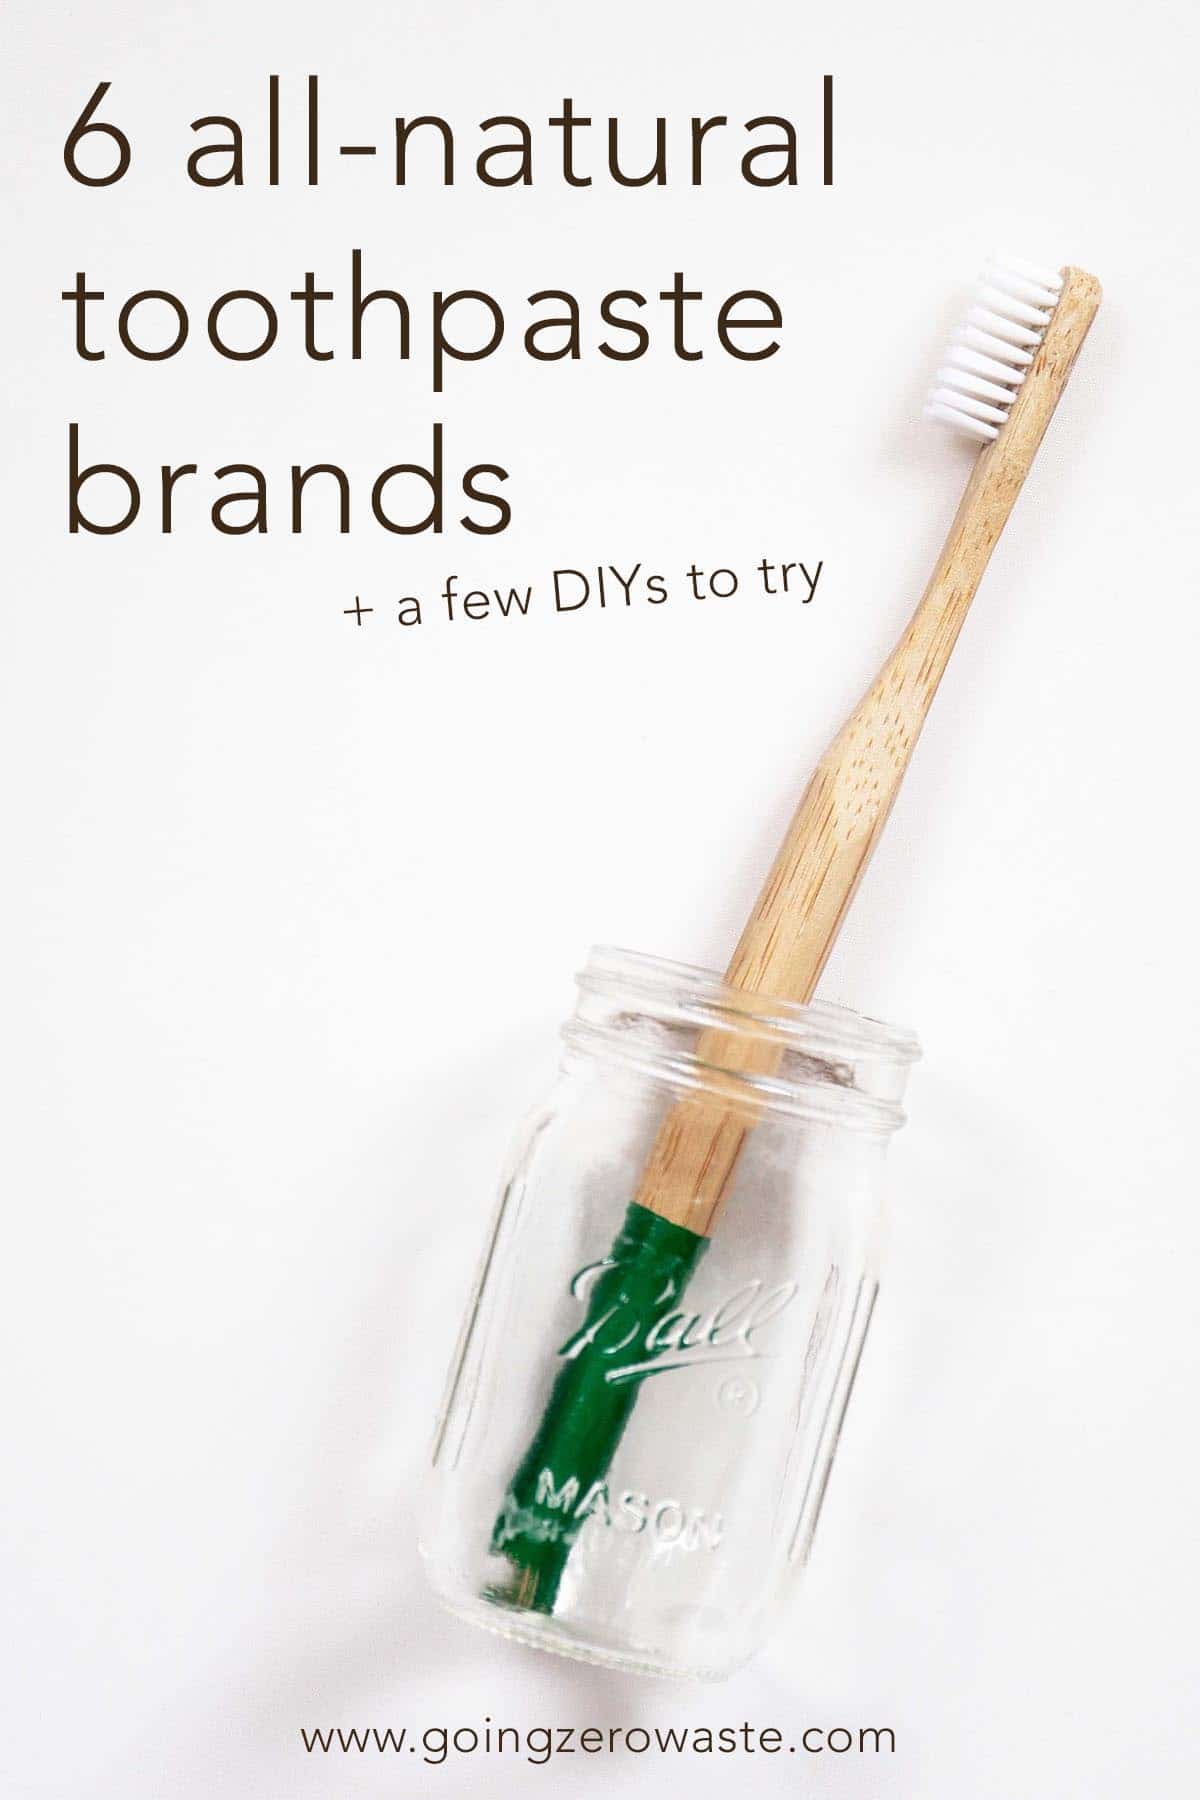 6 All-Natural Toothpaste Brands + DIYs to Try